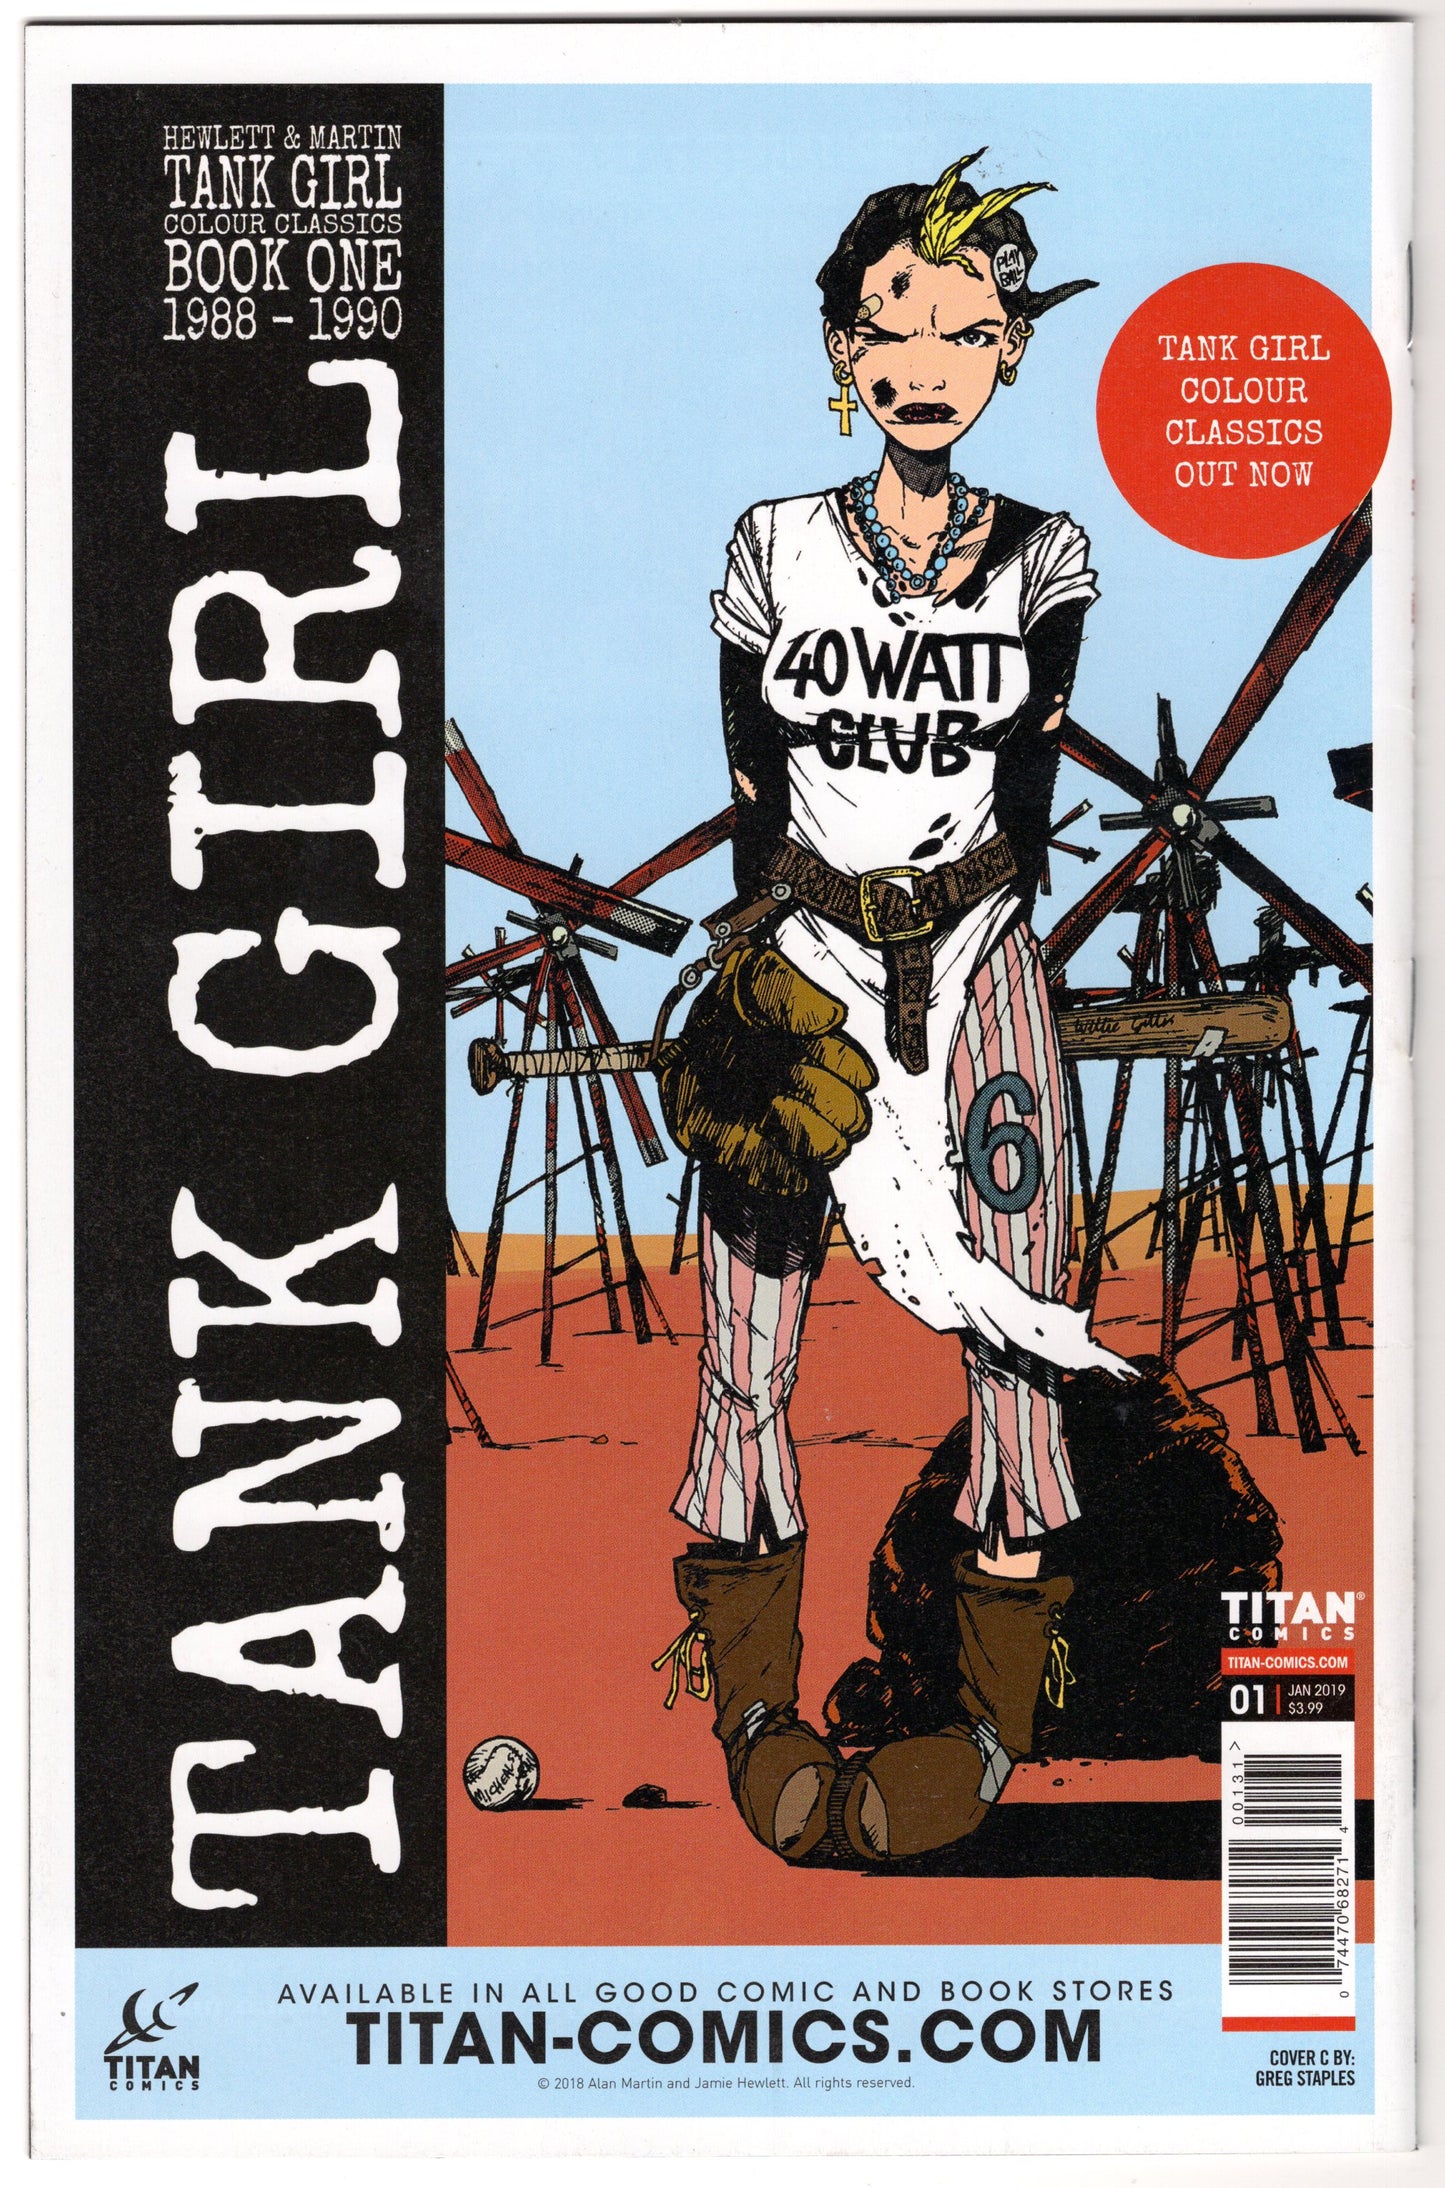 Tank Girl Action Alley - Issue #1 "Fiona Staples Variant Cover" (Jan. 2019 - Titan Comics) NM